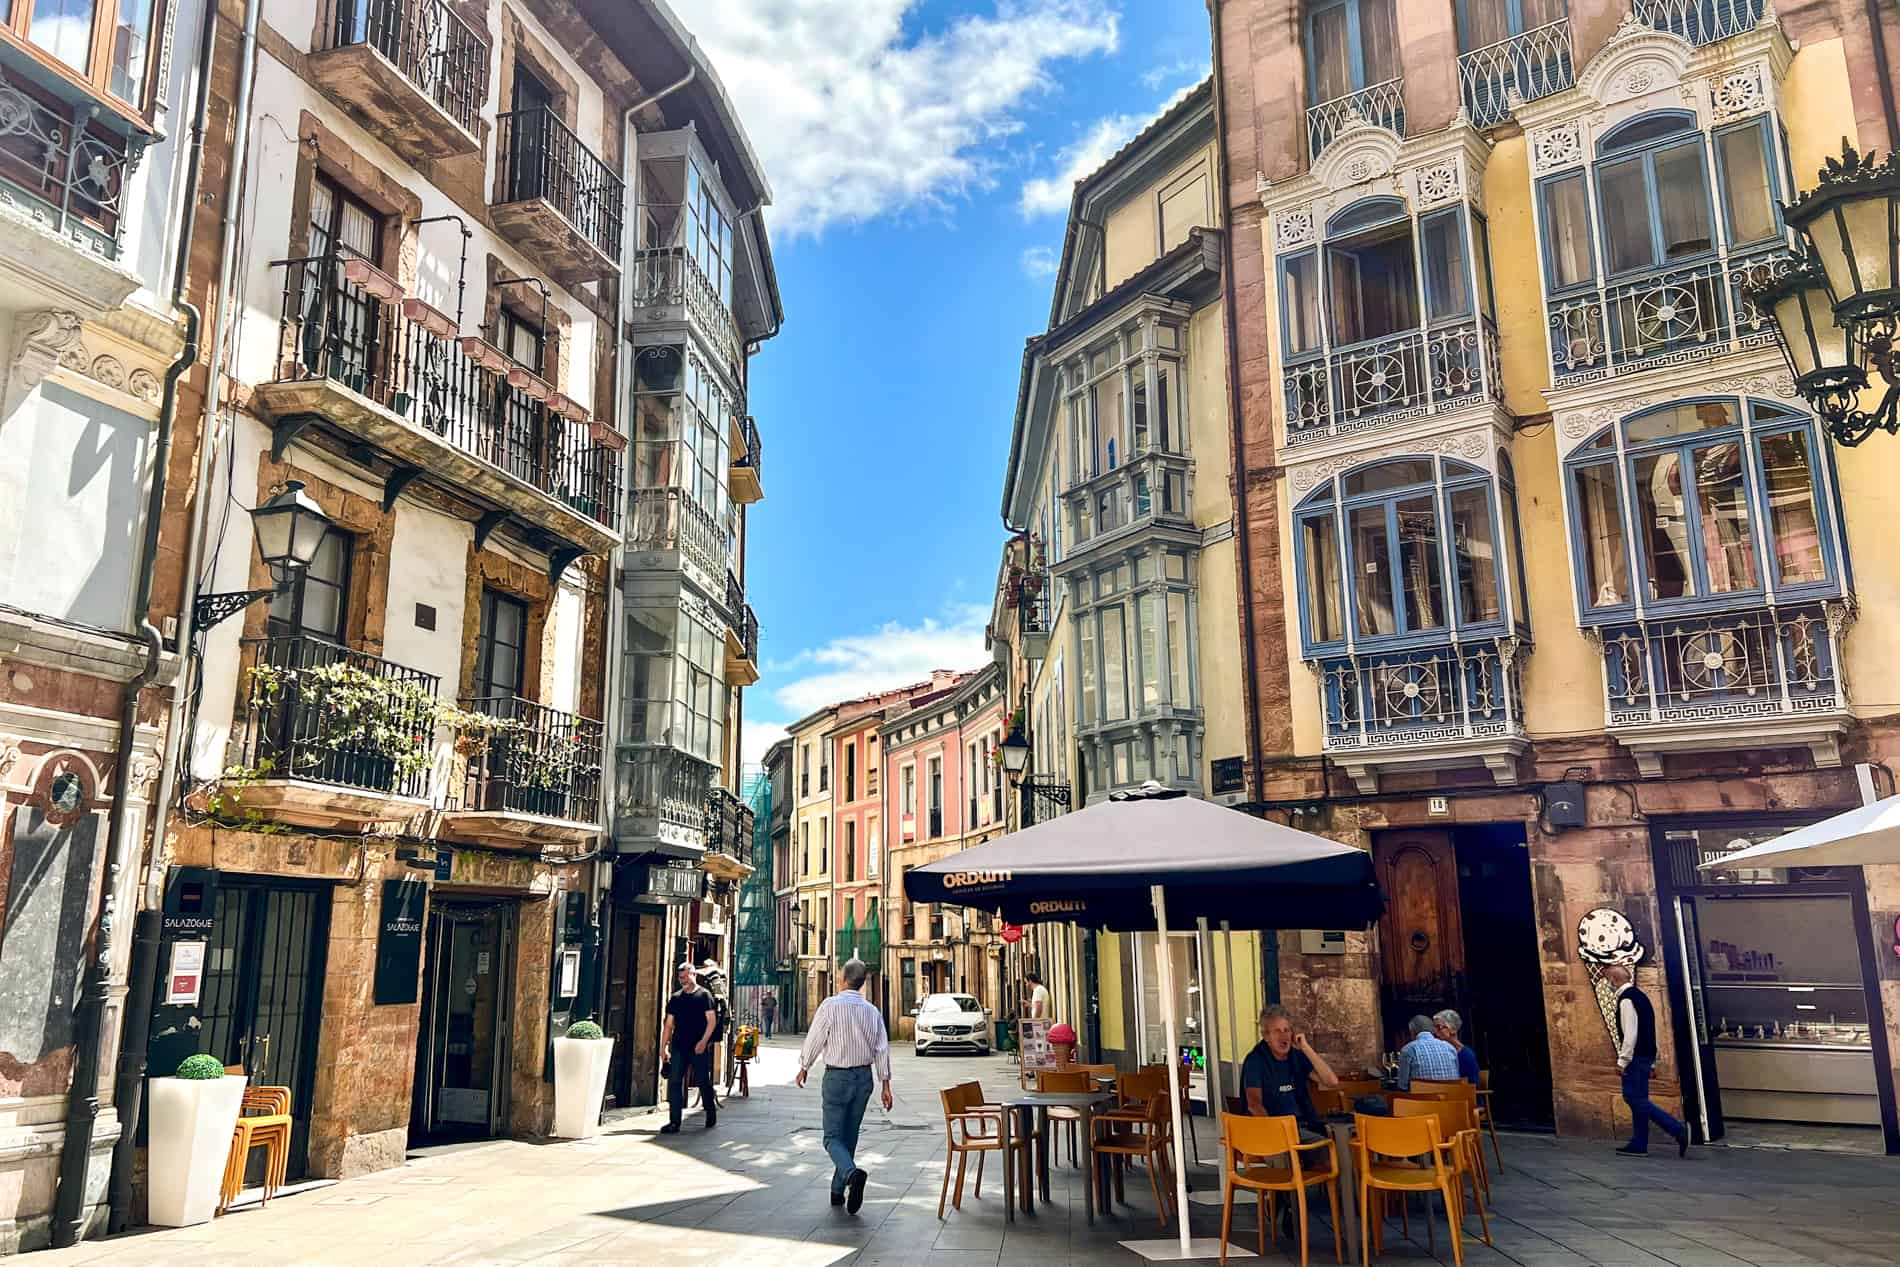 People sit outside at a cafe amongst pretty, pastel painting buildings with iron balconies on a street in Oviedo, Spain. 